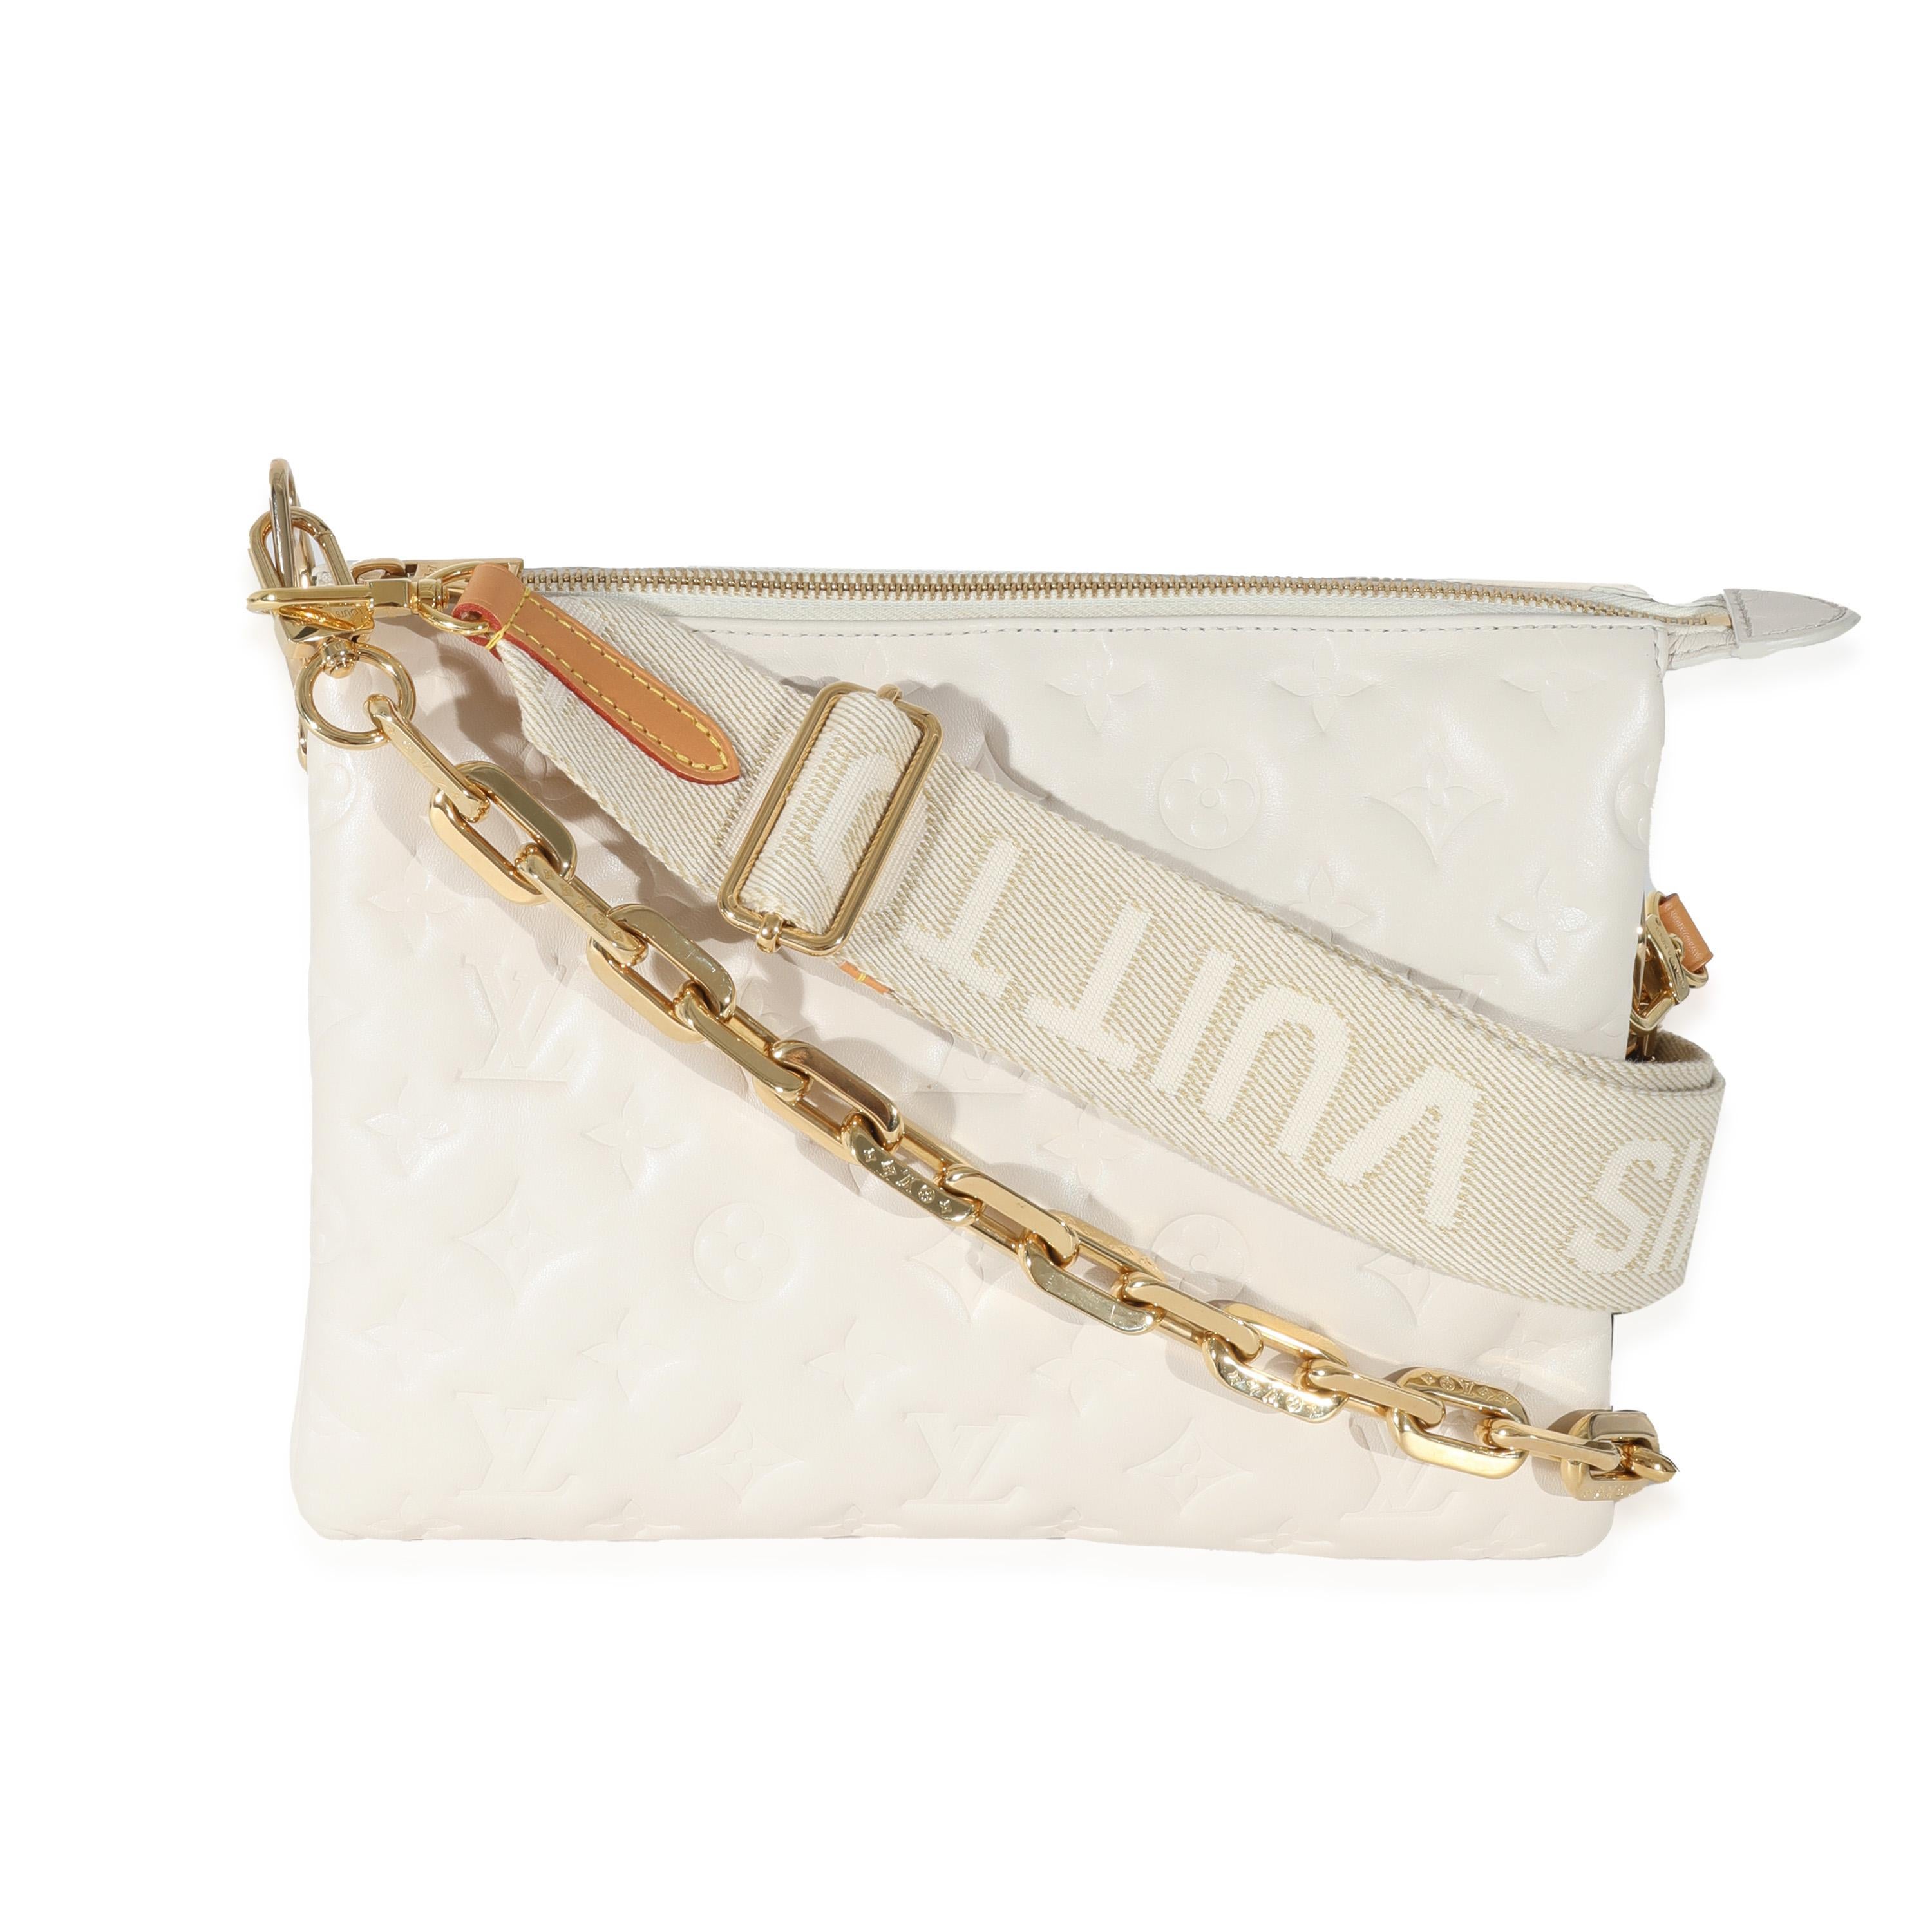 Listing Title: Louis Vuitton Cream Monogram Lambskin Coussin PM
SKU: 131345
MSRP: 4700.00
Condition: Pre-owned 
Handbag Condition: Very Good
Condition Comments: Item is in very good condition with minor signs of wear. Faint marks to leather.